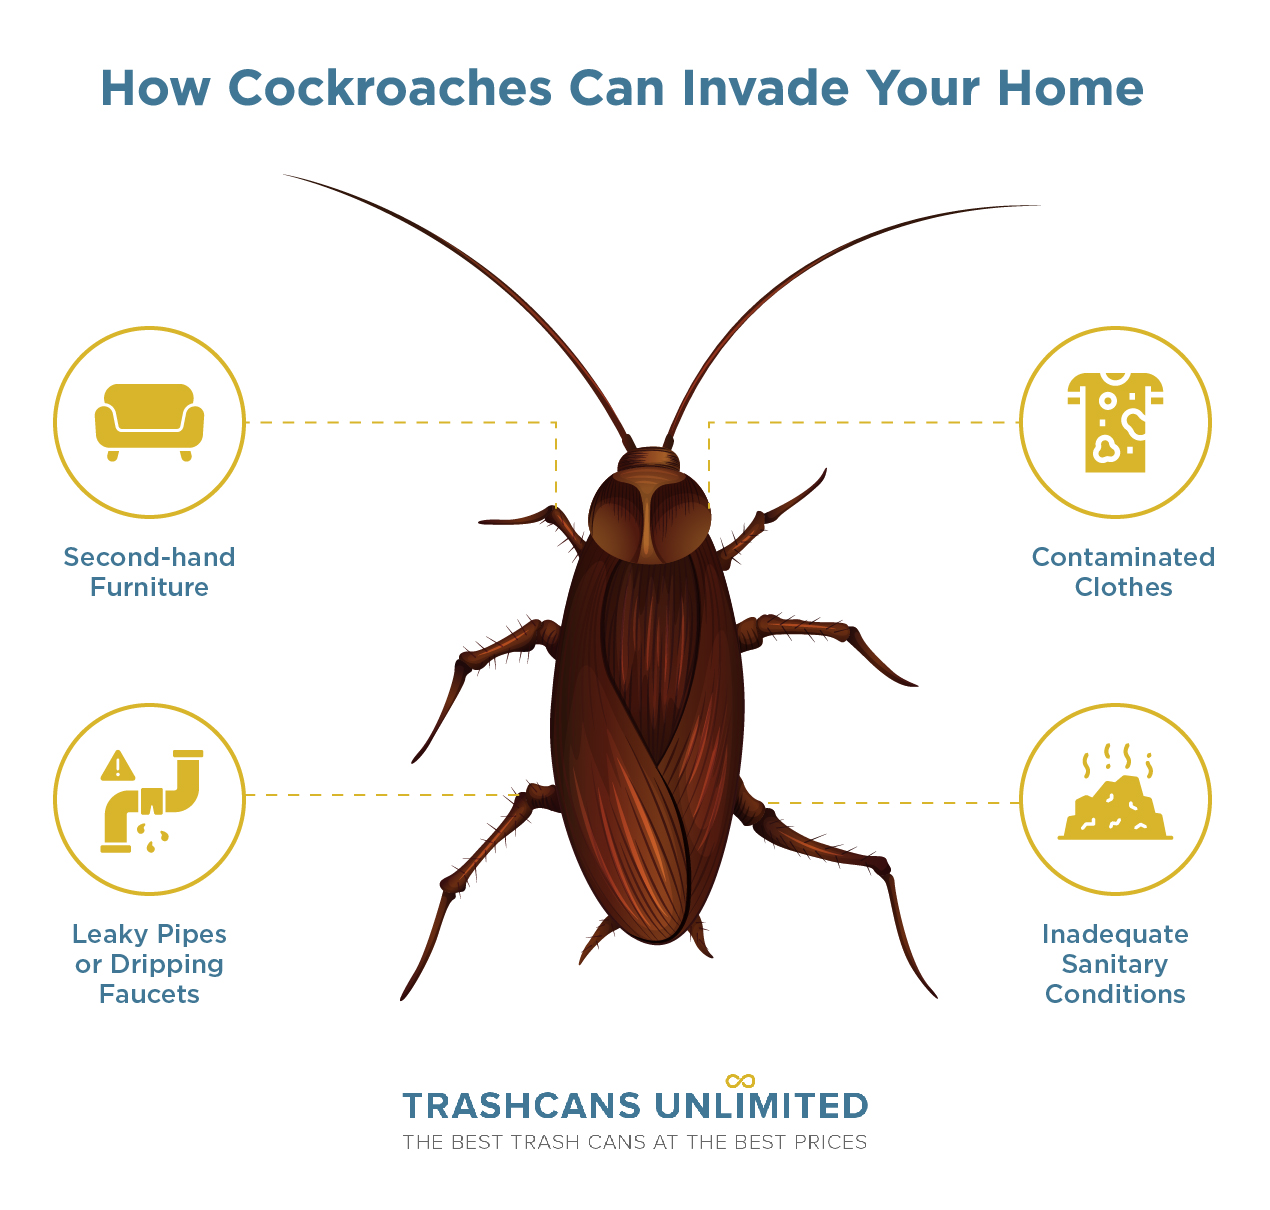 How Cockroaches Can Invade Your Home